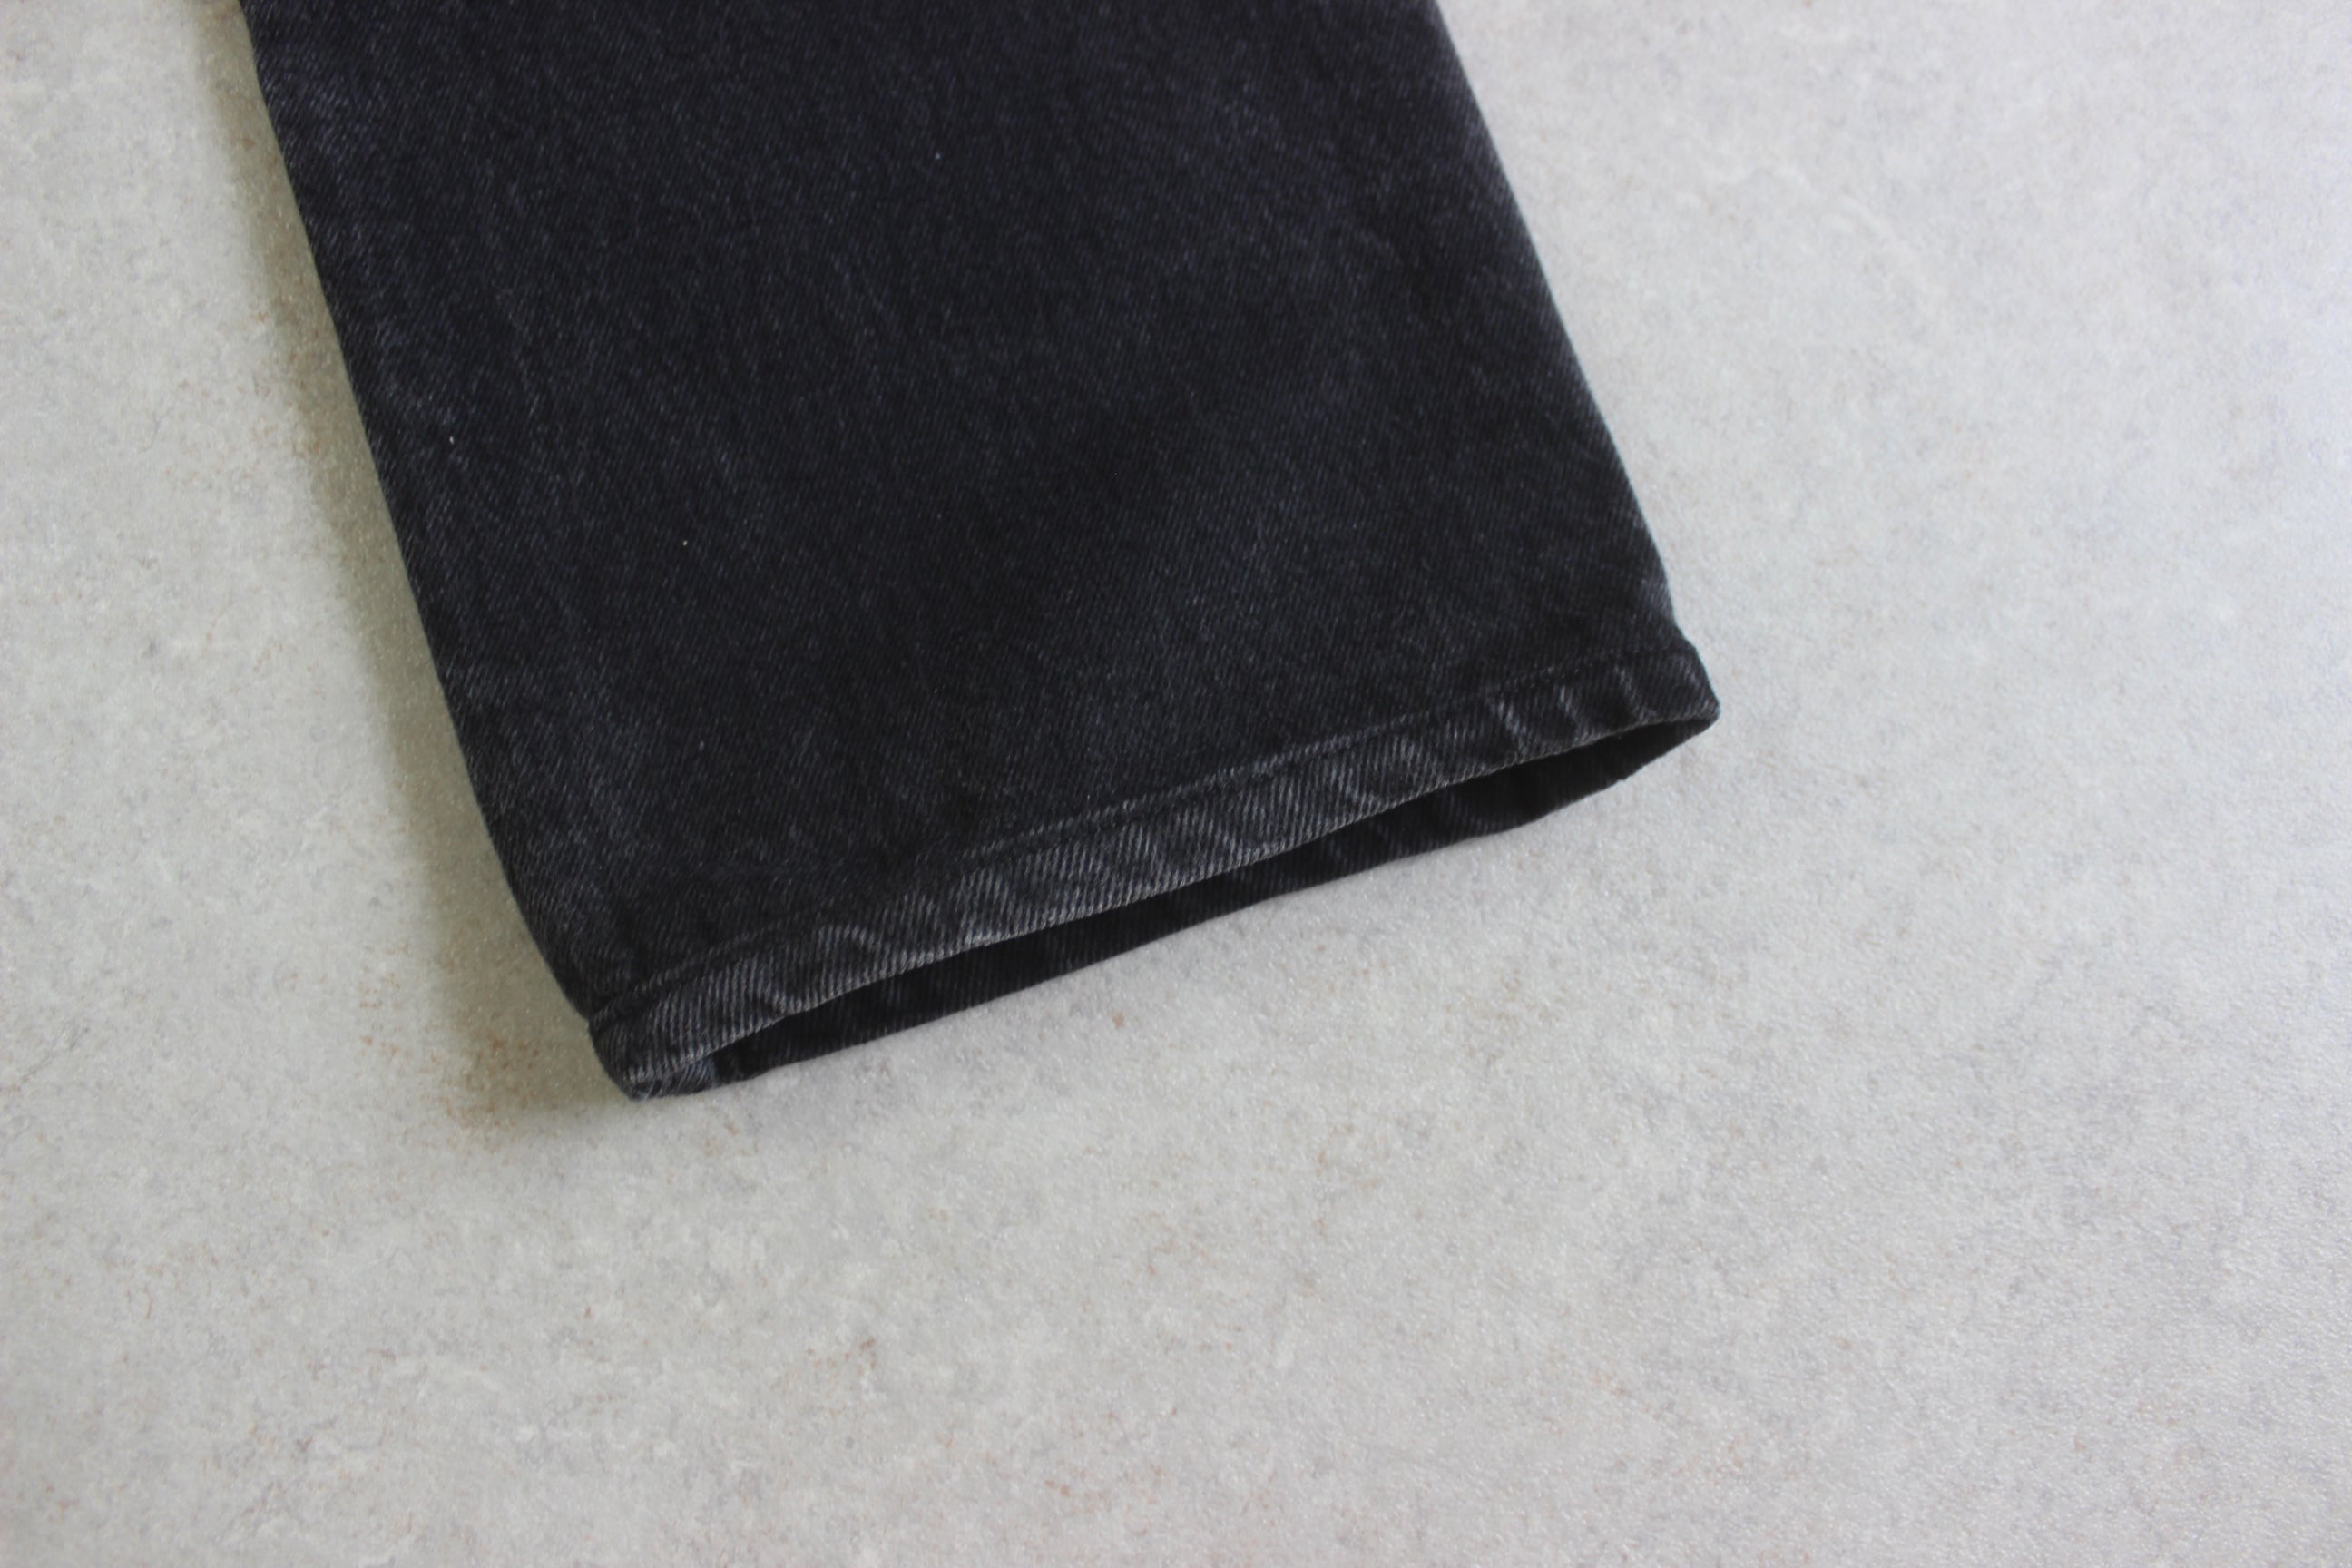 Levi's - Vintage 501 Made in USA Jeans - Black - 31/30